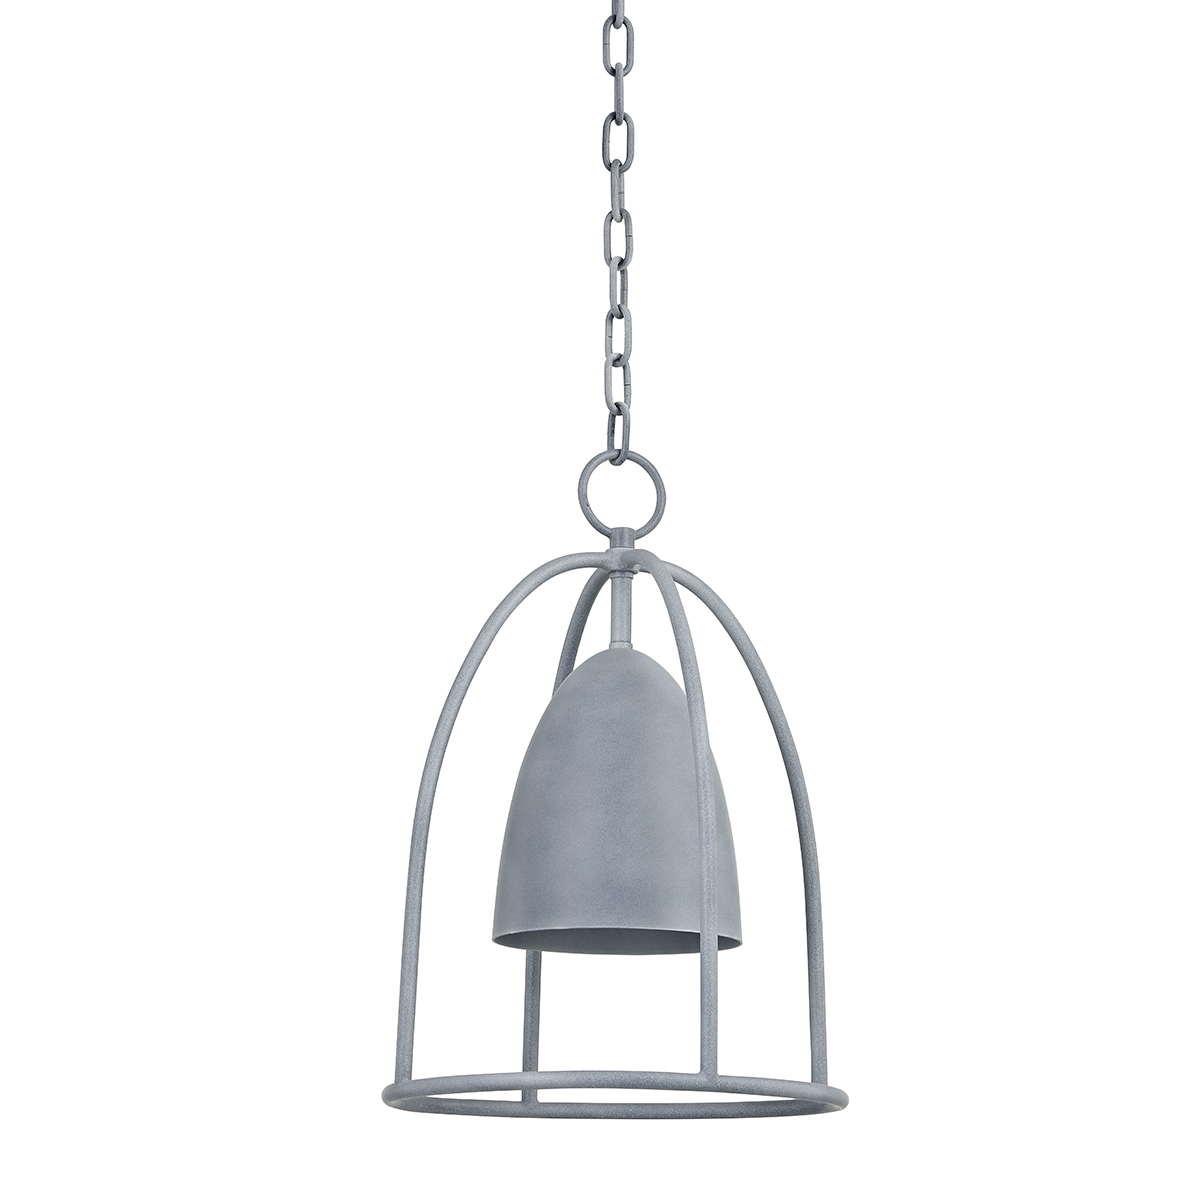 Troy WISTERIA 1 LIGHT SMALL EXTERIOR LANTERN F1116 Outdoor l Wall Troy Lighting WEATHERED ZINC  